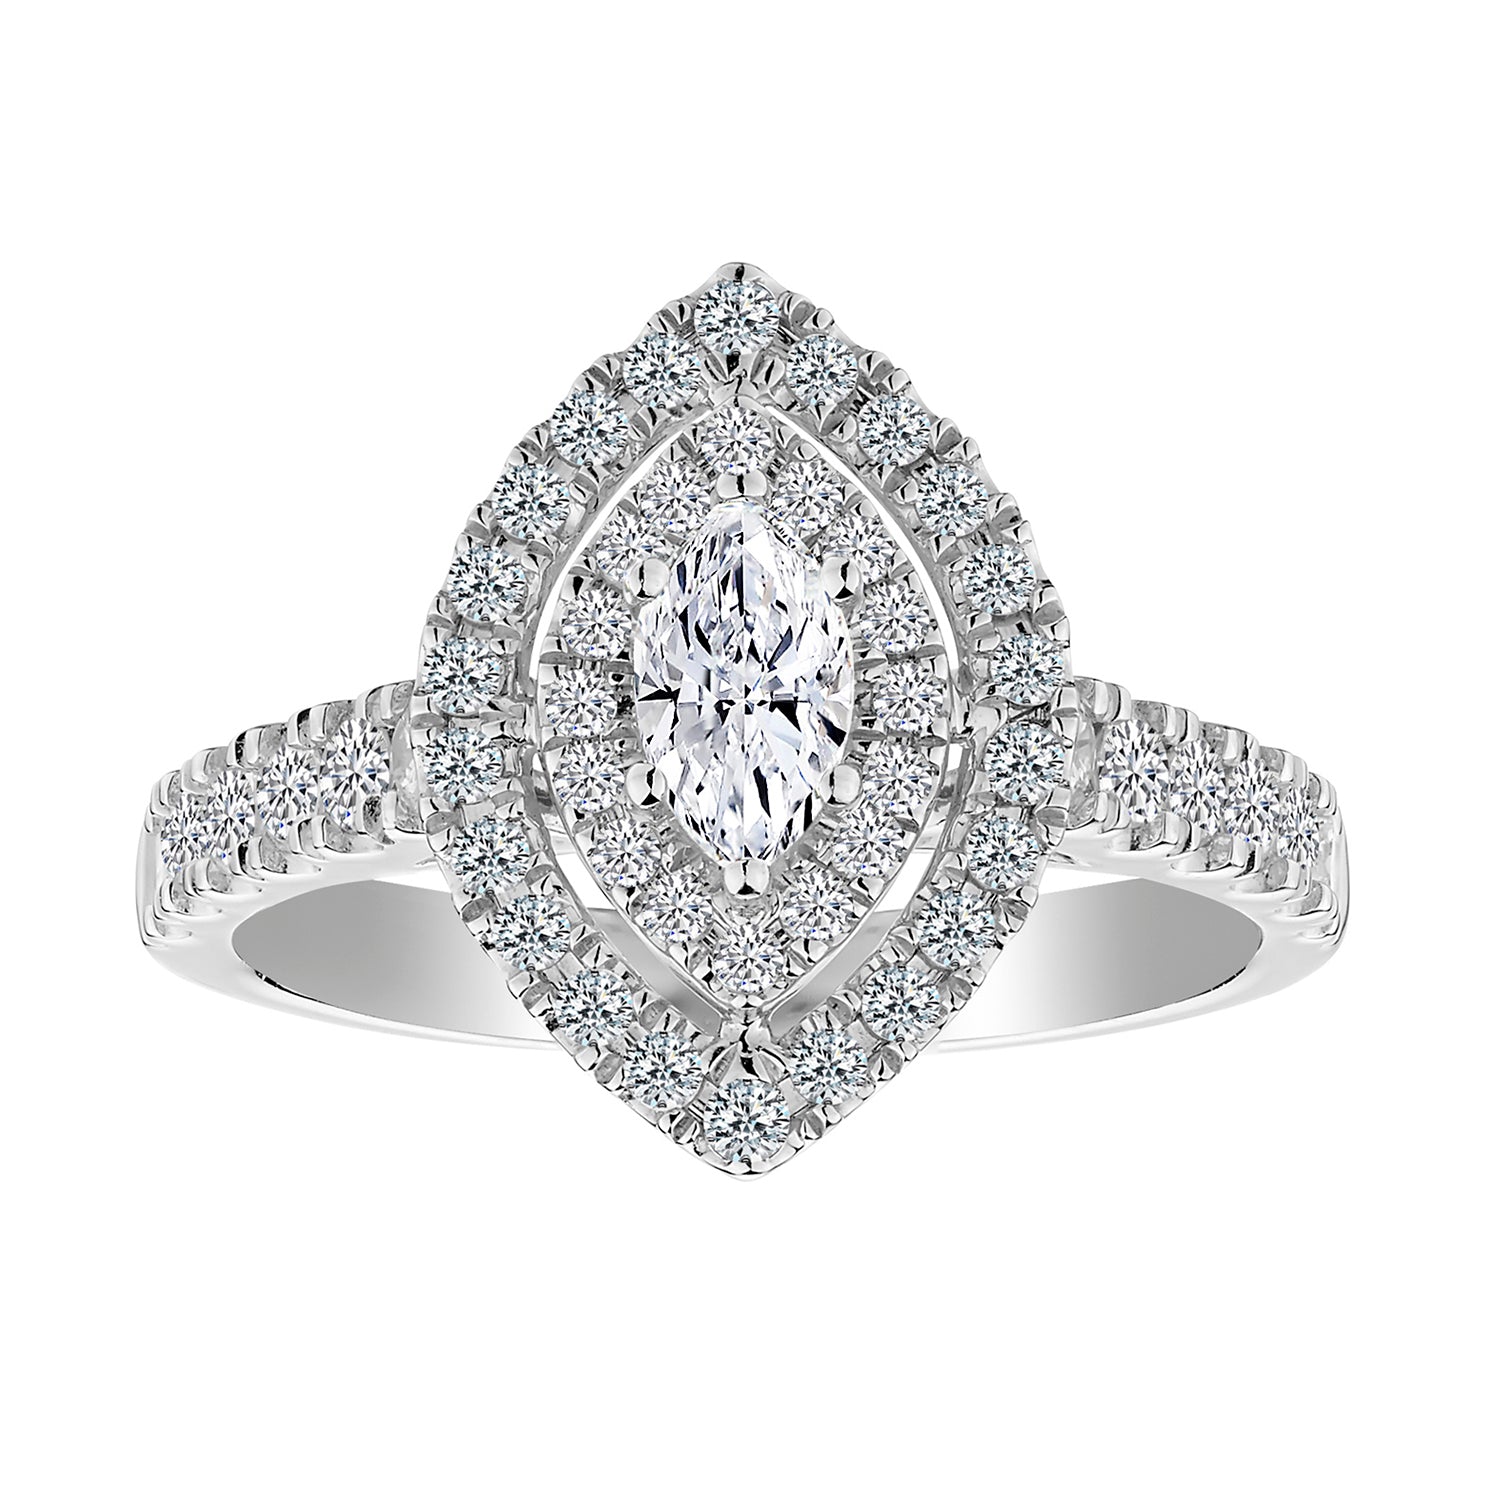 .33 Carat Centre,  1.00 Total Diamond Weight, "Prestige" Engagement Ring,  14kt White Gold. Griffin Jewellery Designs